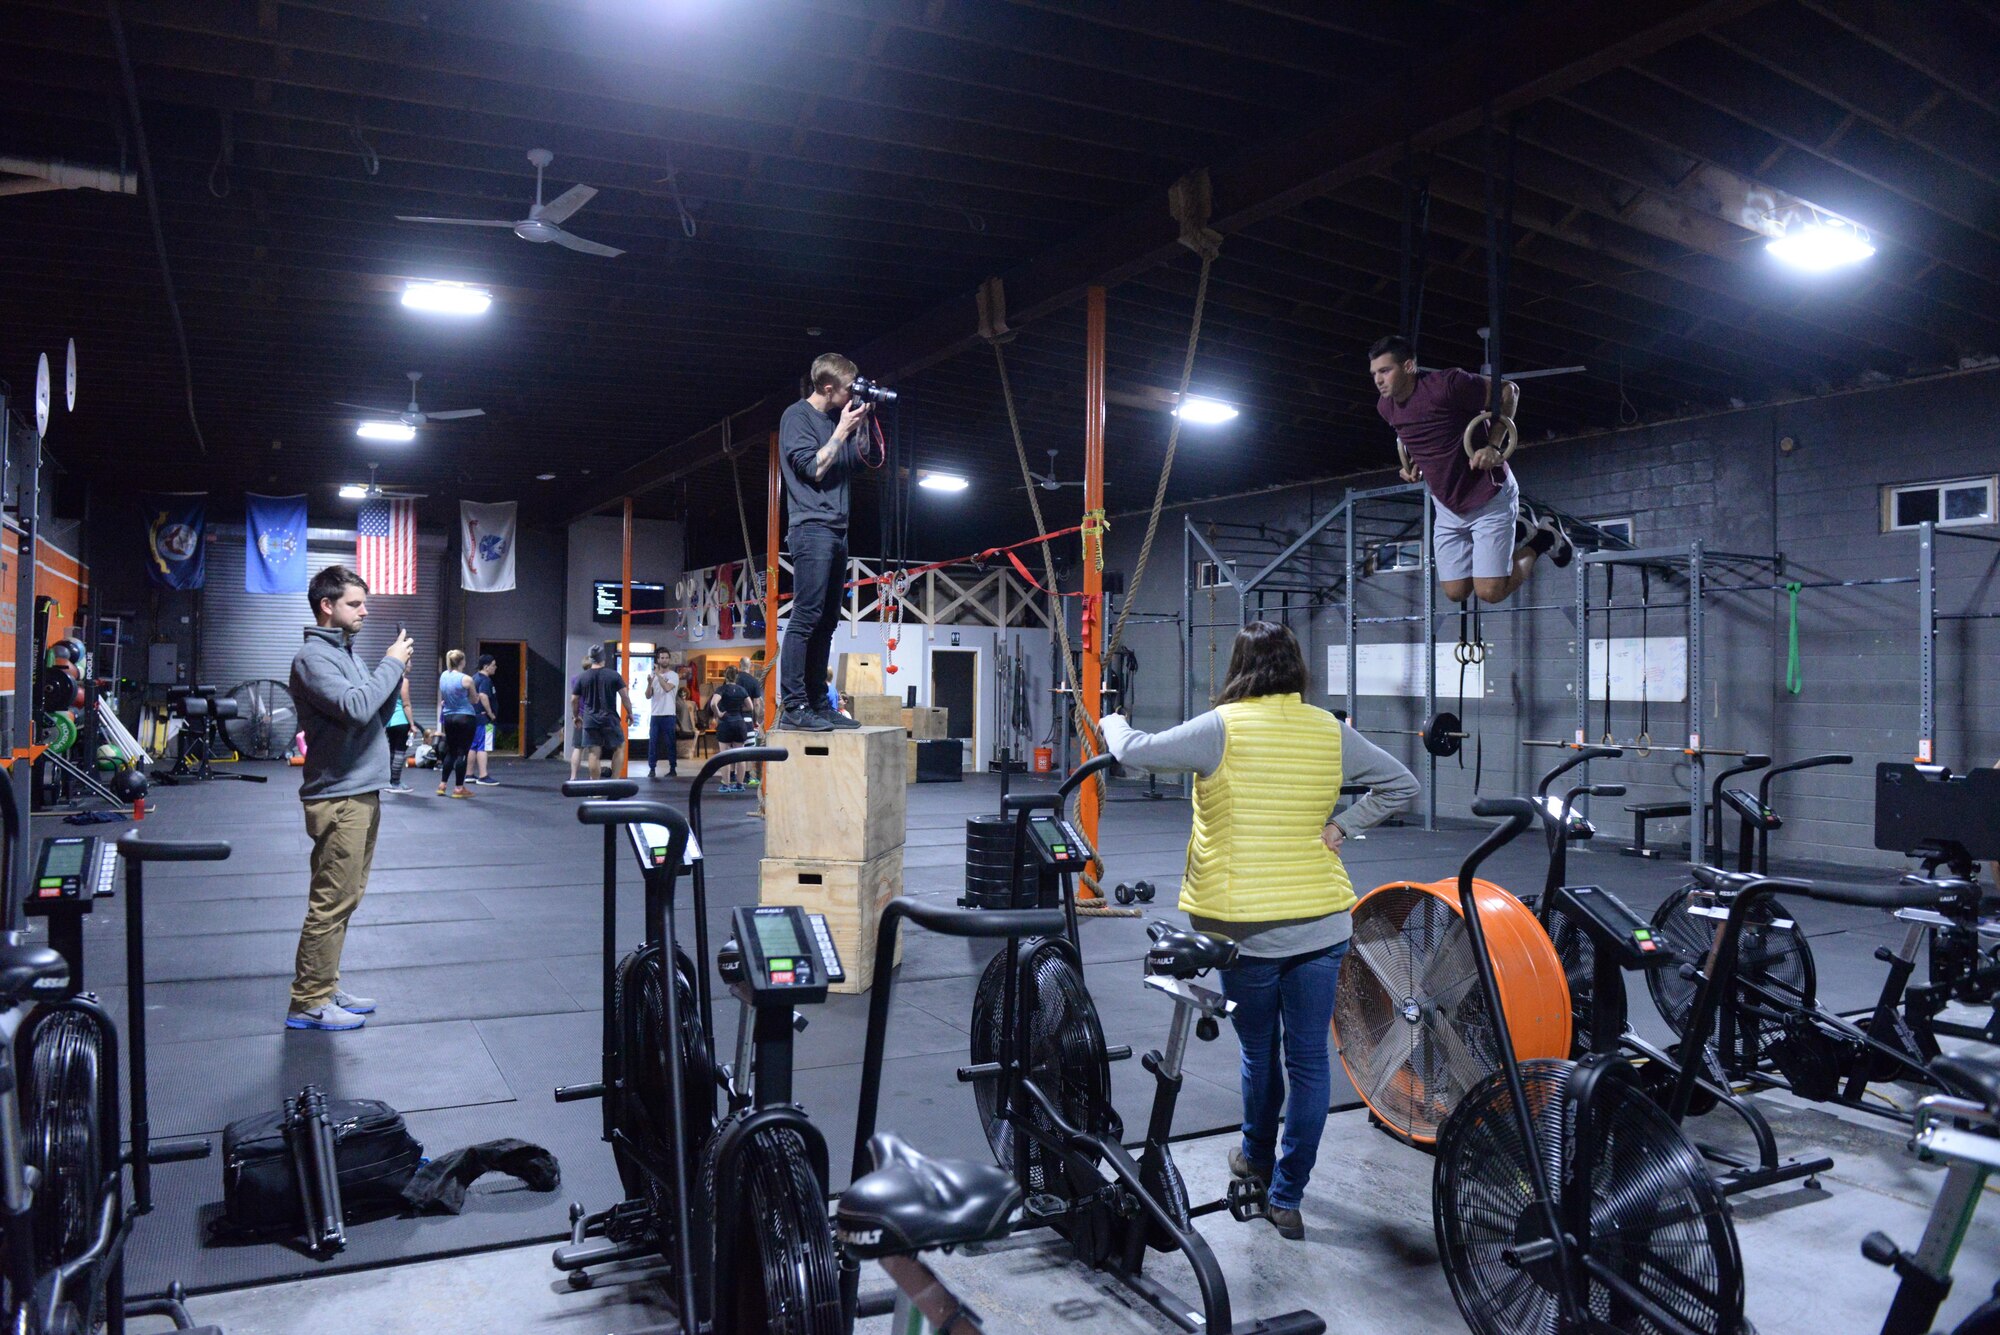 The crew from Futures magazine watch as Senior Airman Alexander Triani, a pararescueman with the 103rd Rescue Squadron of the 106th Rescue Wing assigned to the New York Air National Guard, is photographed doing muscle-ups at a CrossFit Gym in Bayport New York November 1, 2017.